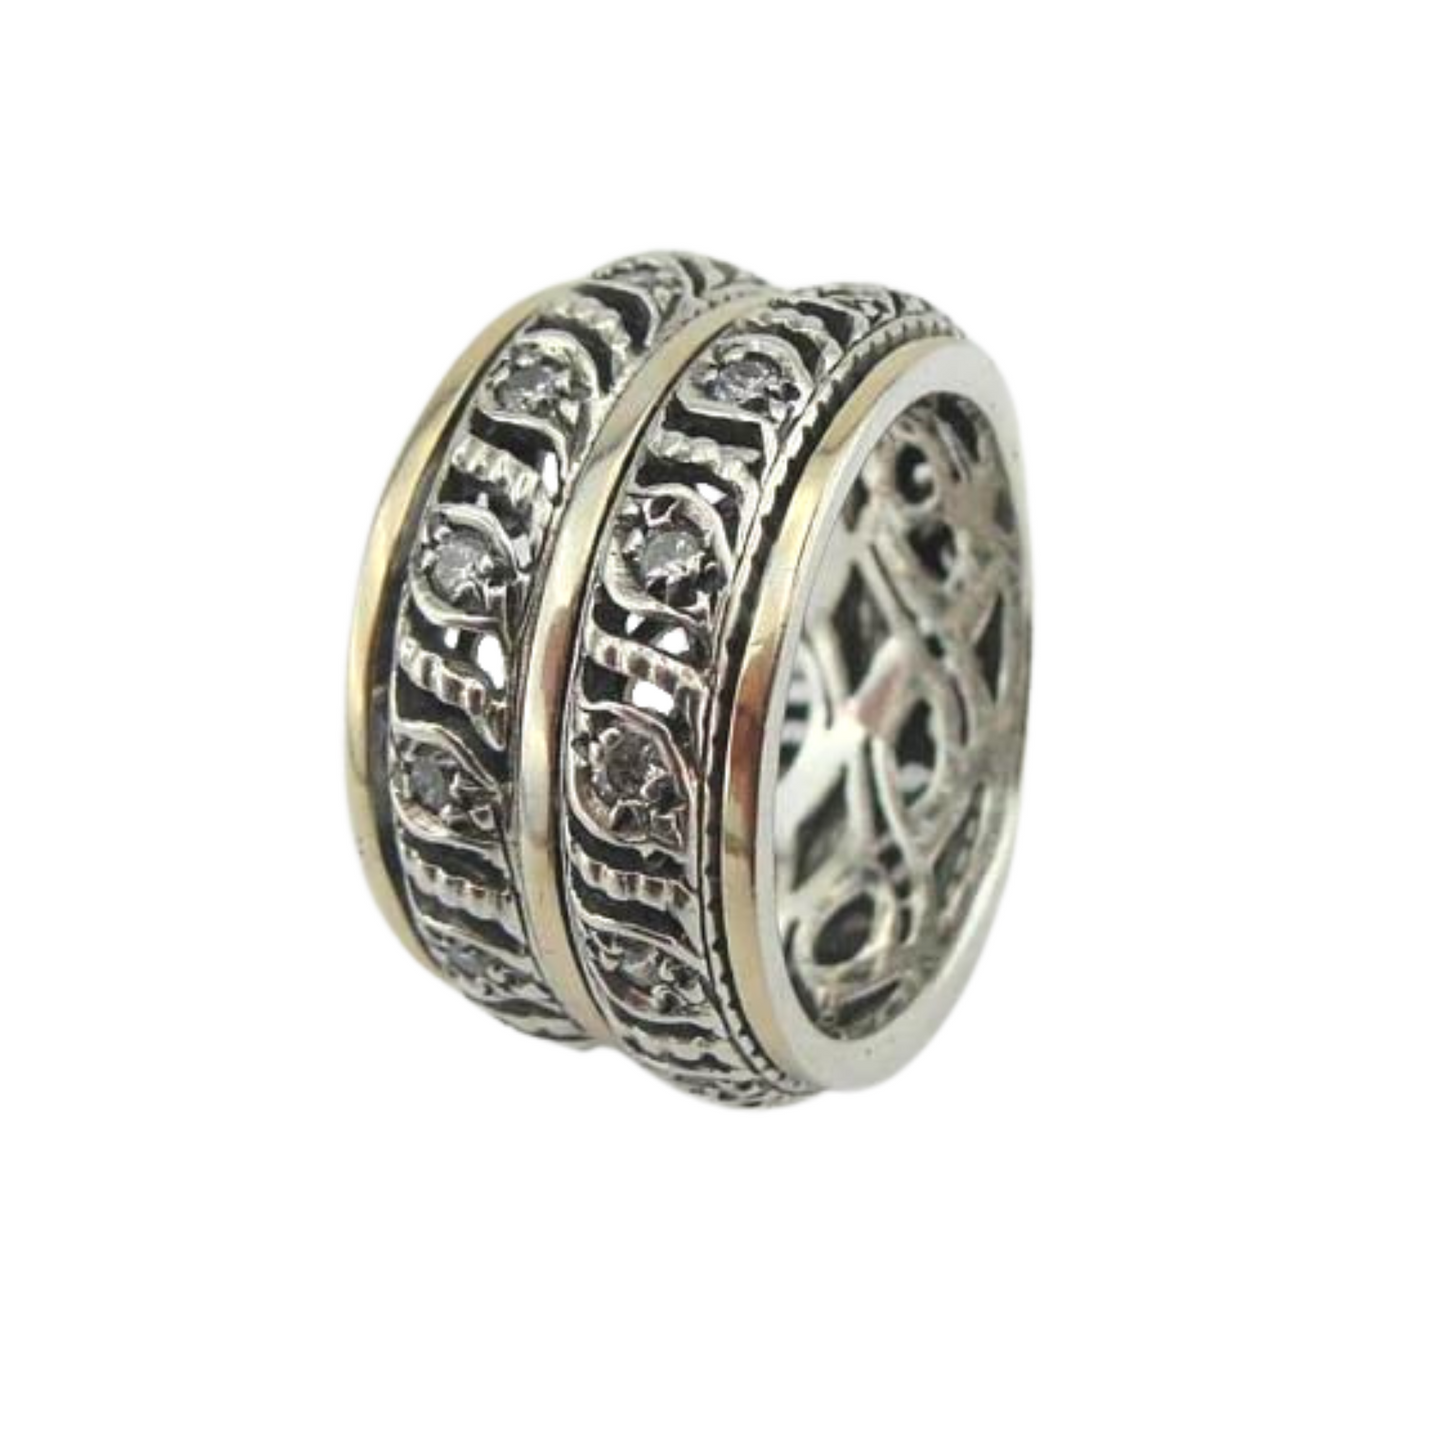 Swivel Band With Sterling Silver and 9K Gold Decorated With White Zircon